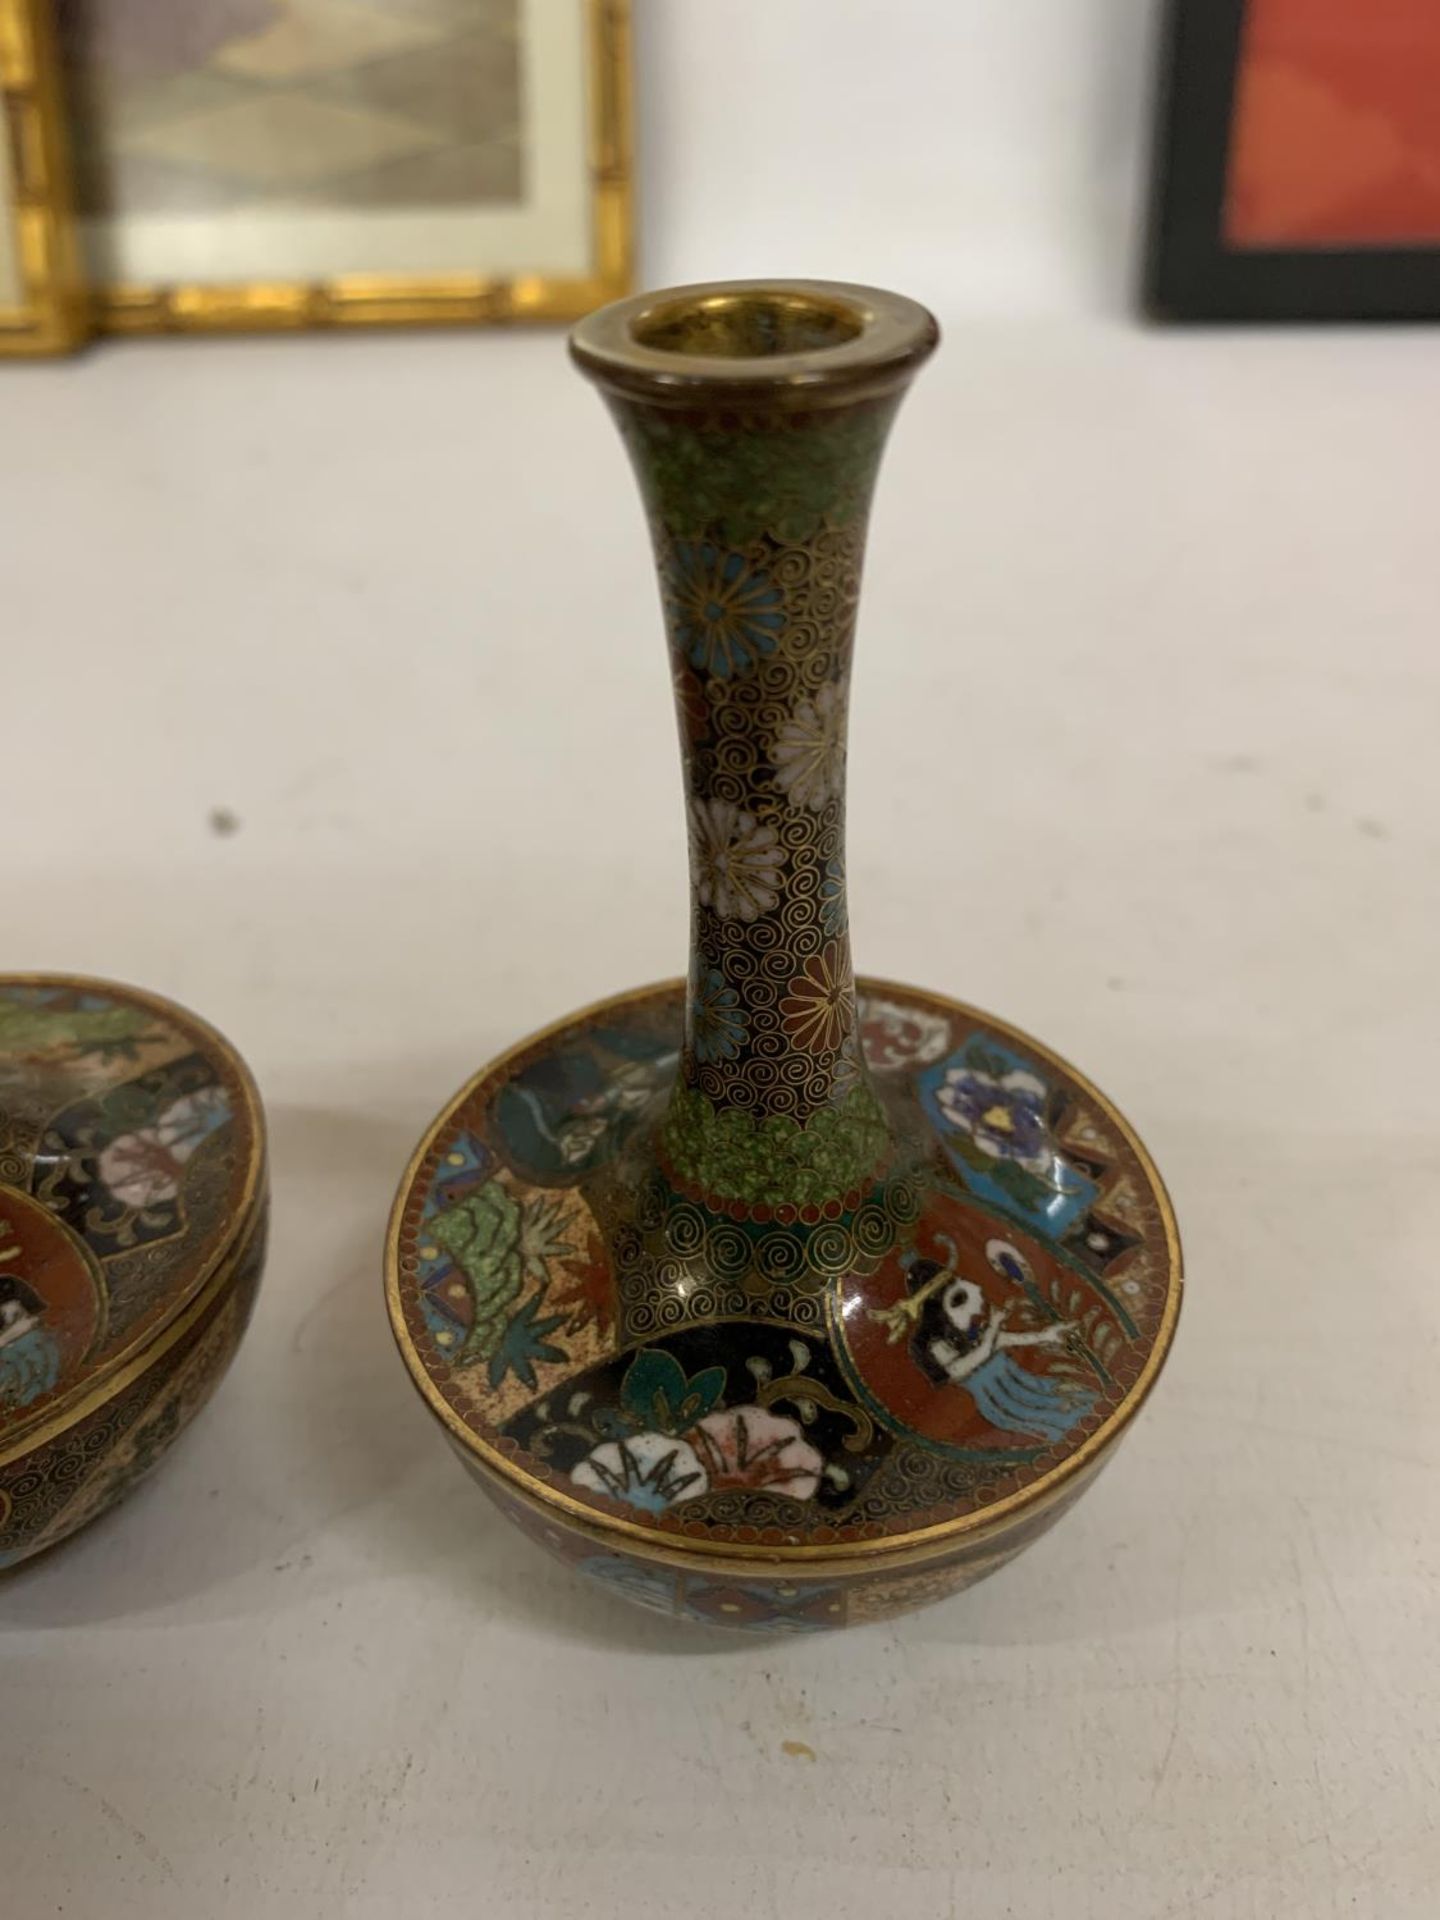 A PAIR OF CHINESE CLOISONNE ENAMEL BRASS VASES - 10 CM - Image 2 of 3